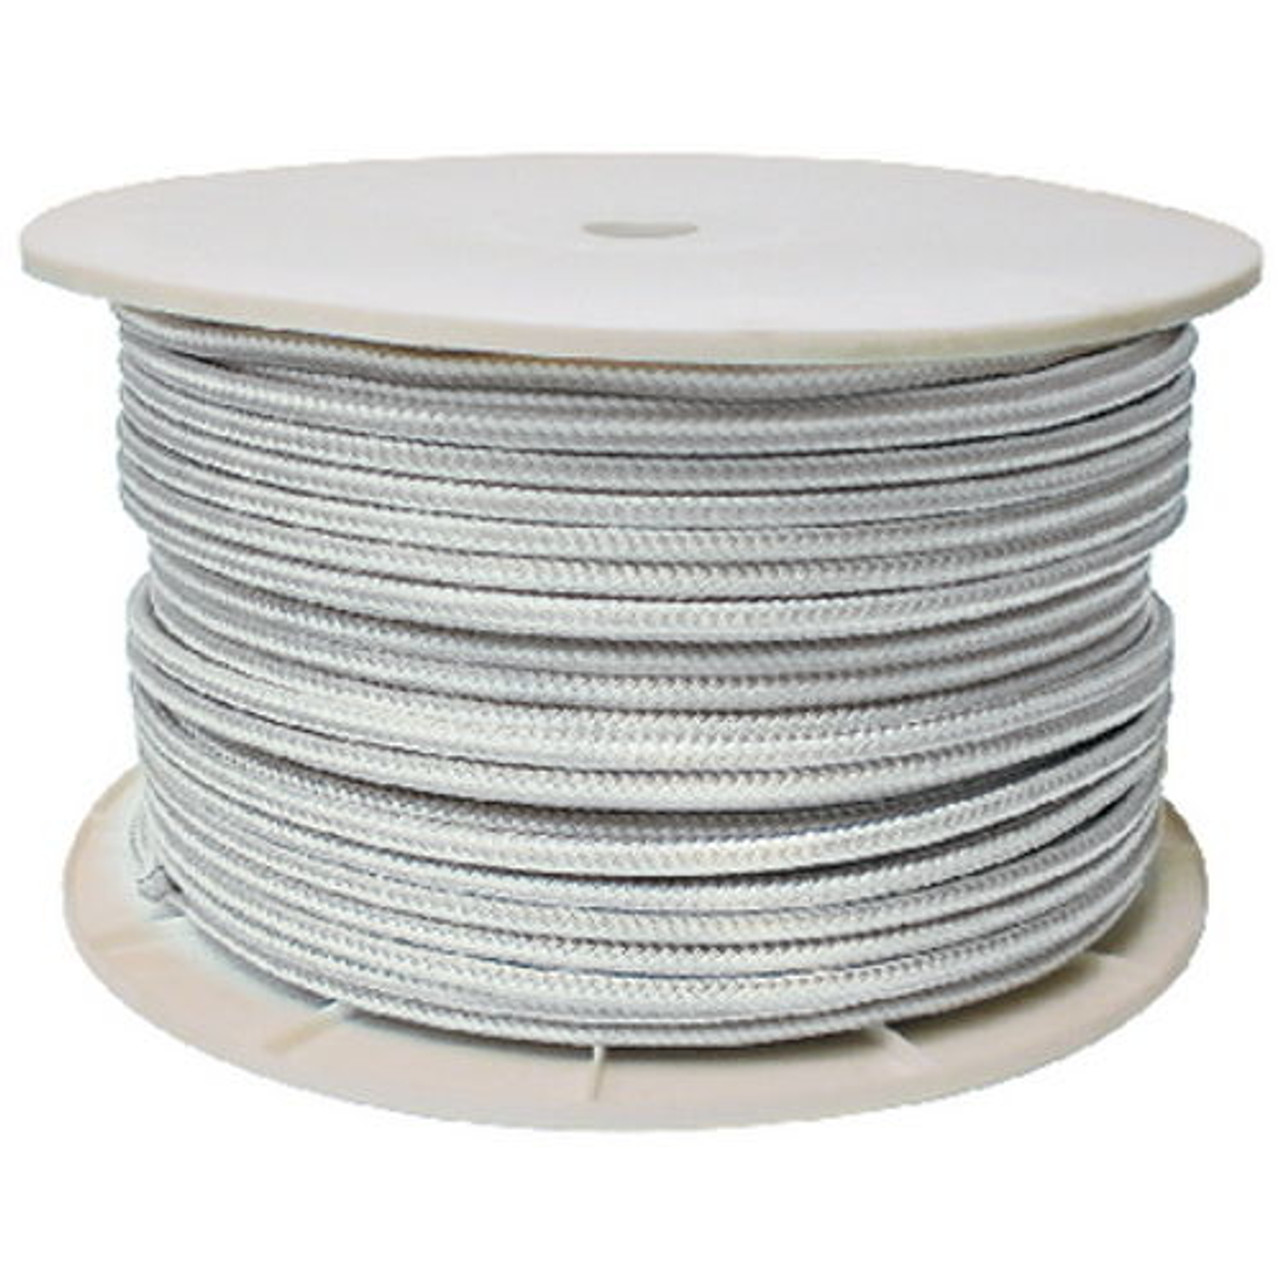 5/8 Inch x 600 Ft White Double Braid Nylon Rope Spool for Boats